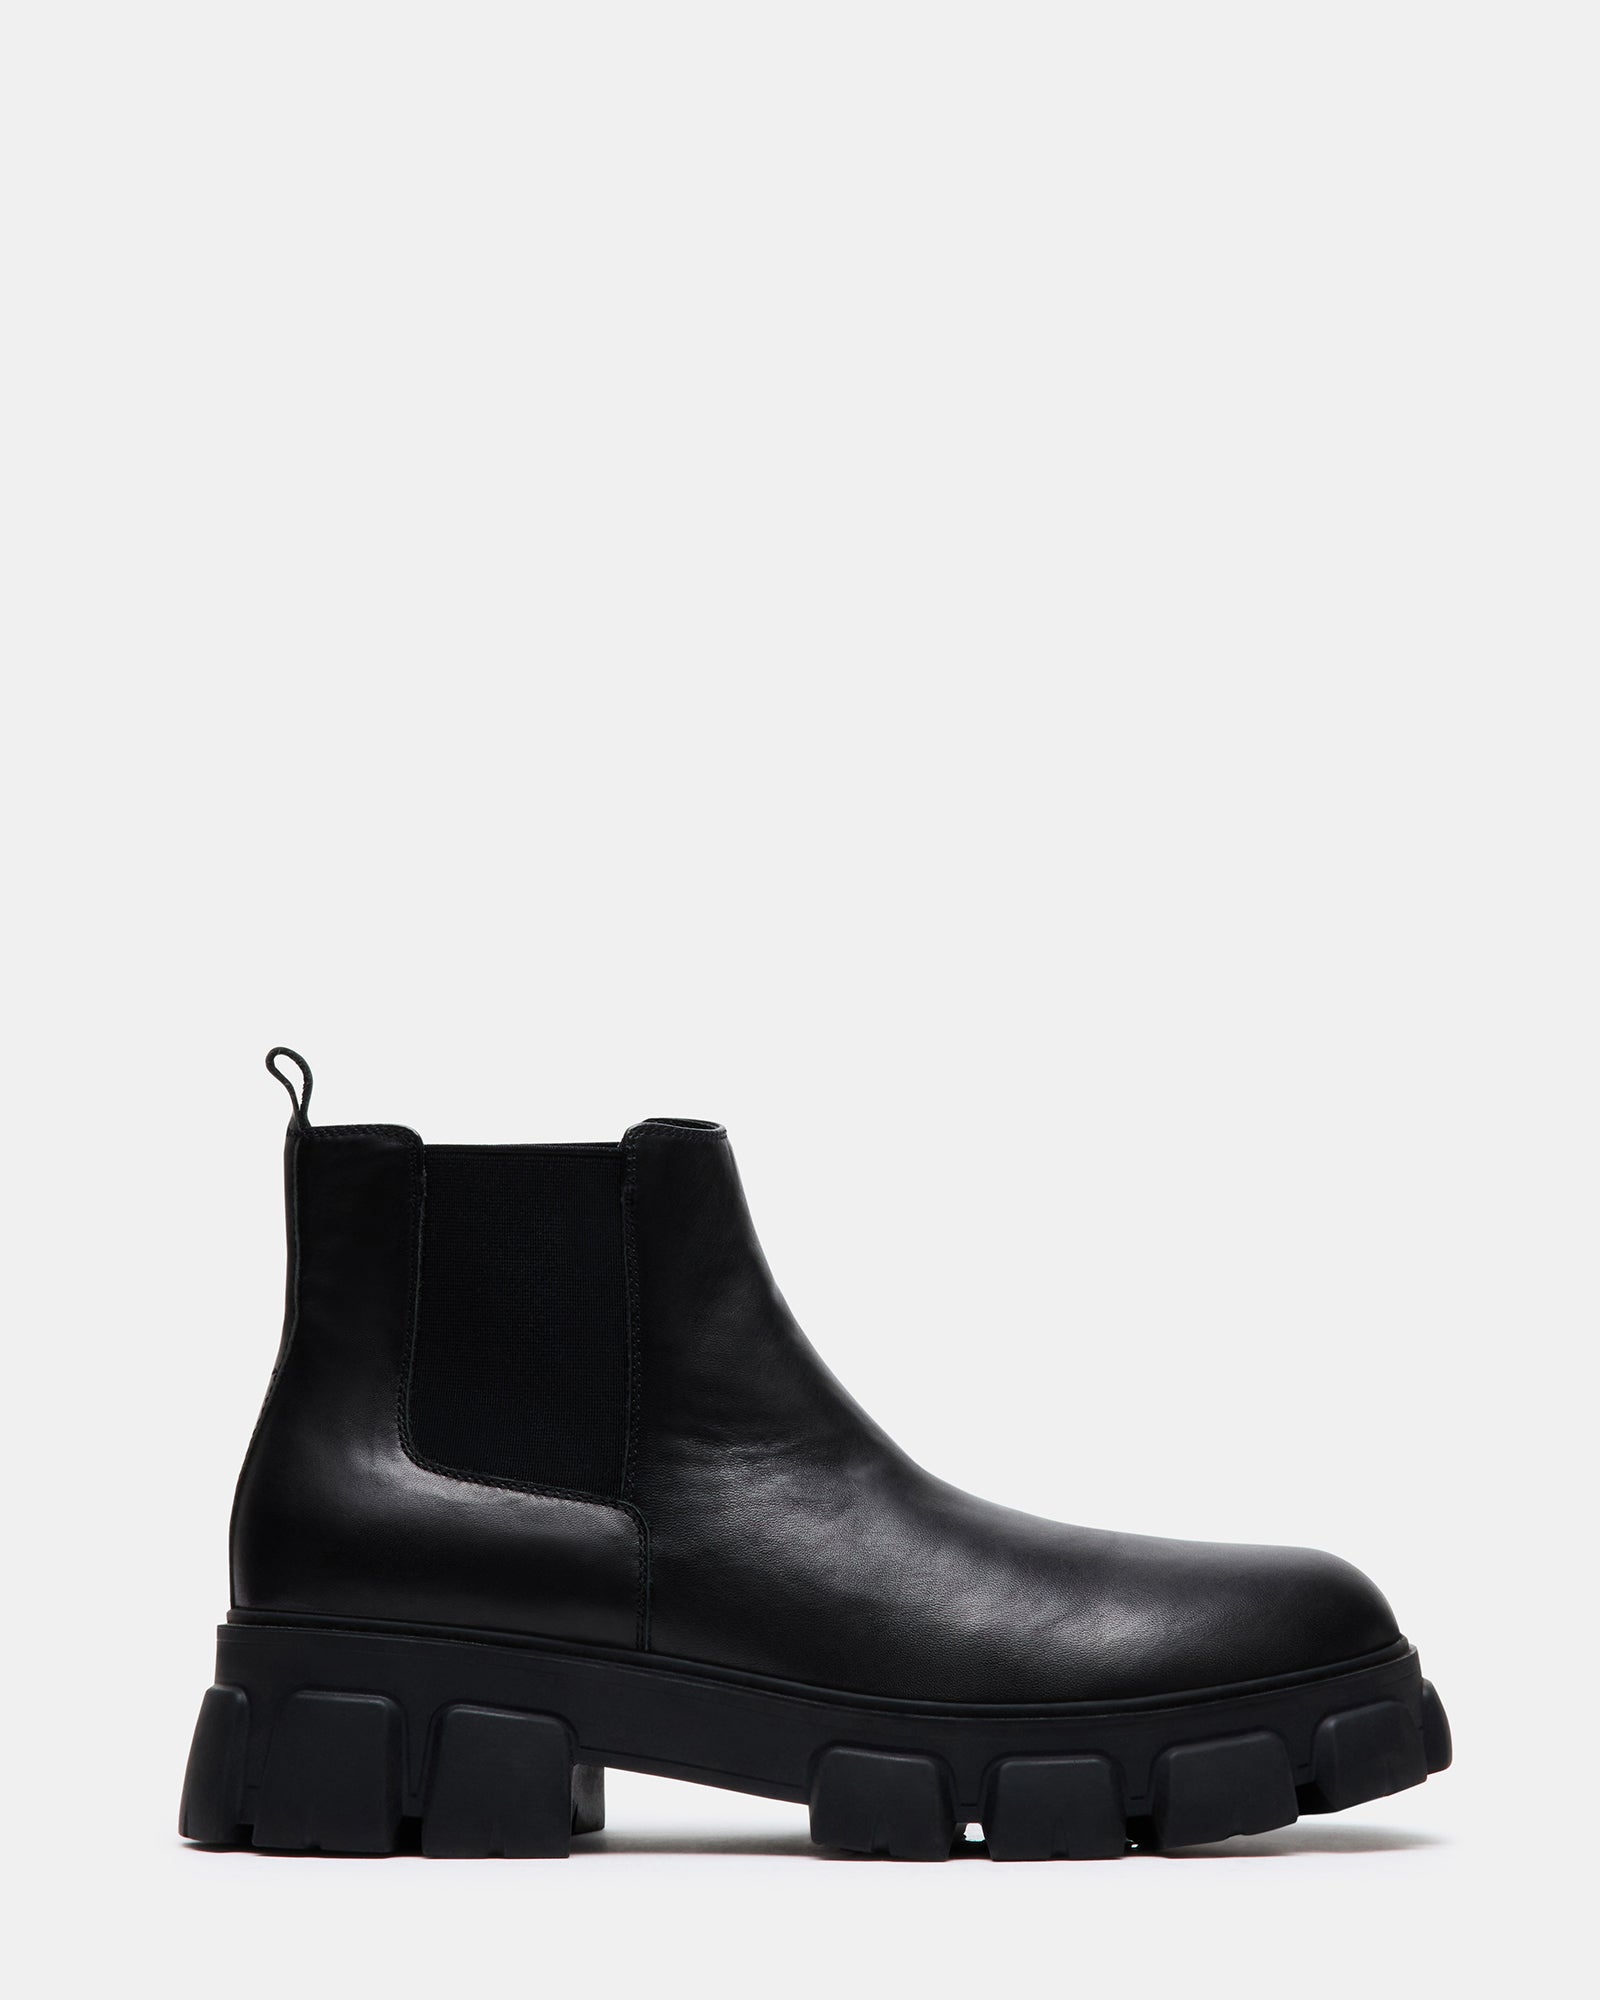 COPA Black Leather Lug Sole Chelsea Ankle Boot | Men's Boots – Steve Madden